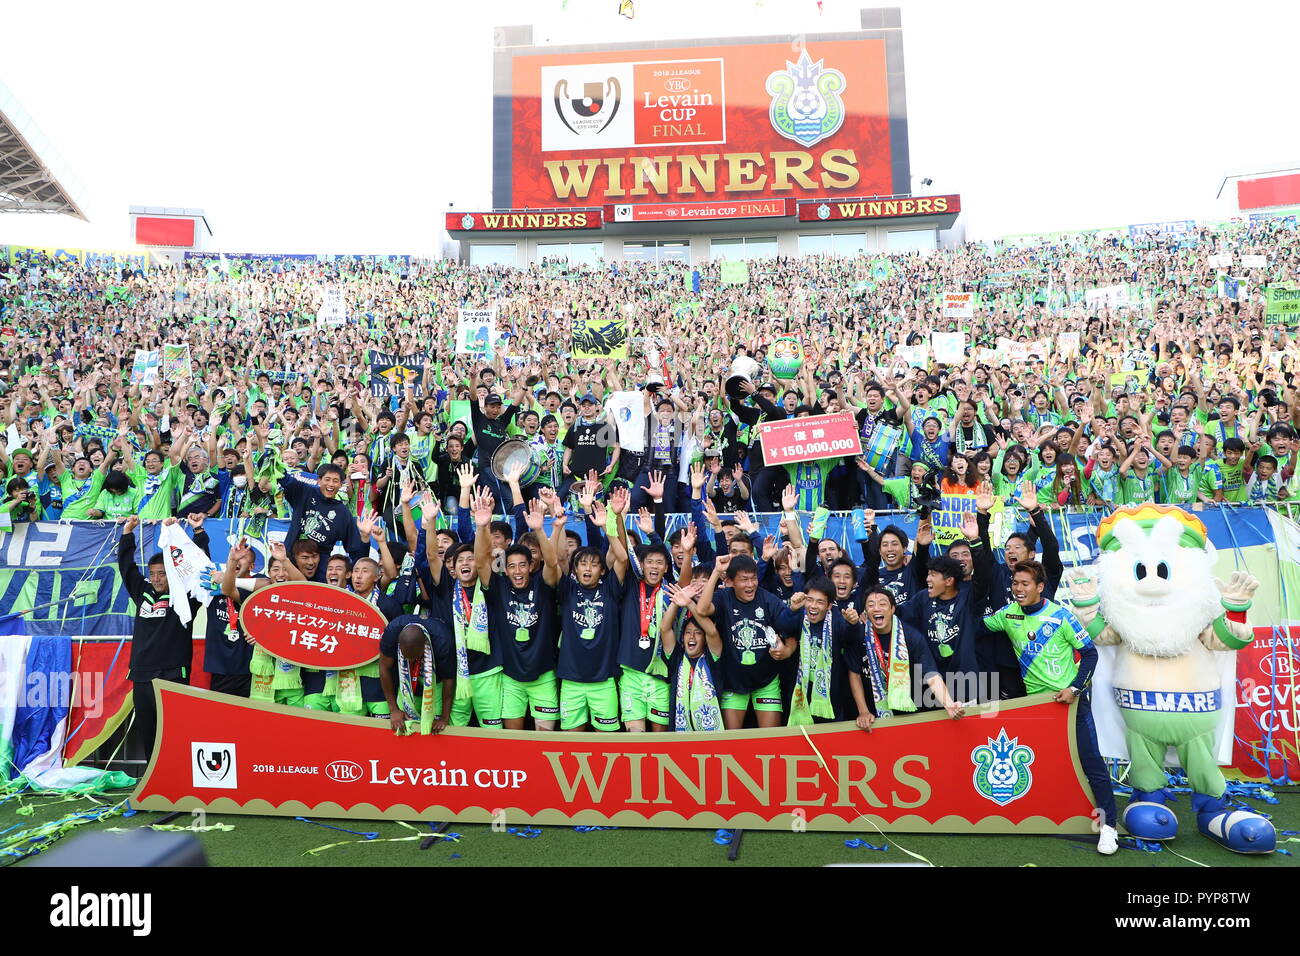 Saitama Japan 27th Oct 18 Shonan Bellmare Team Group Football Soccer Shonan Bellmare Players Celebrate With Fans And The Club Mascot King Bell After Winning The 18 J League Ybc Levain Cup Final